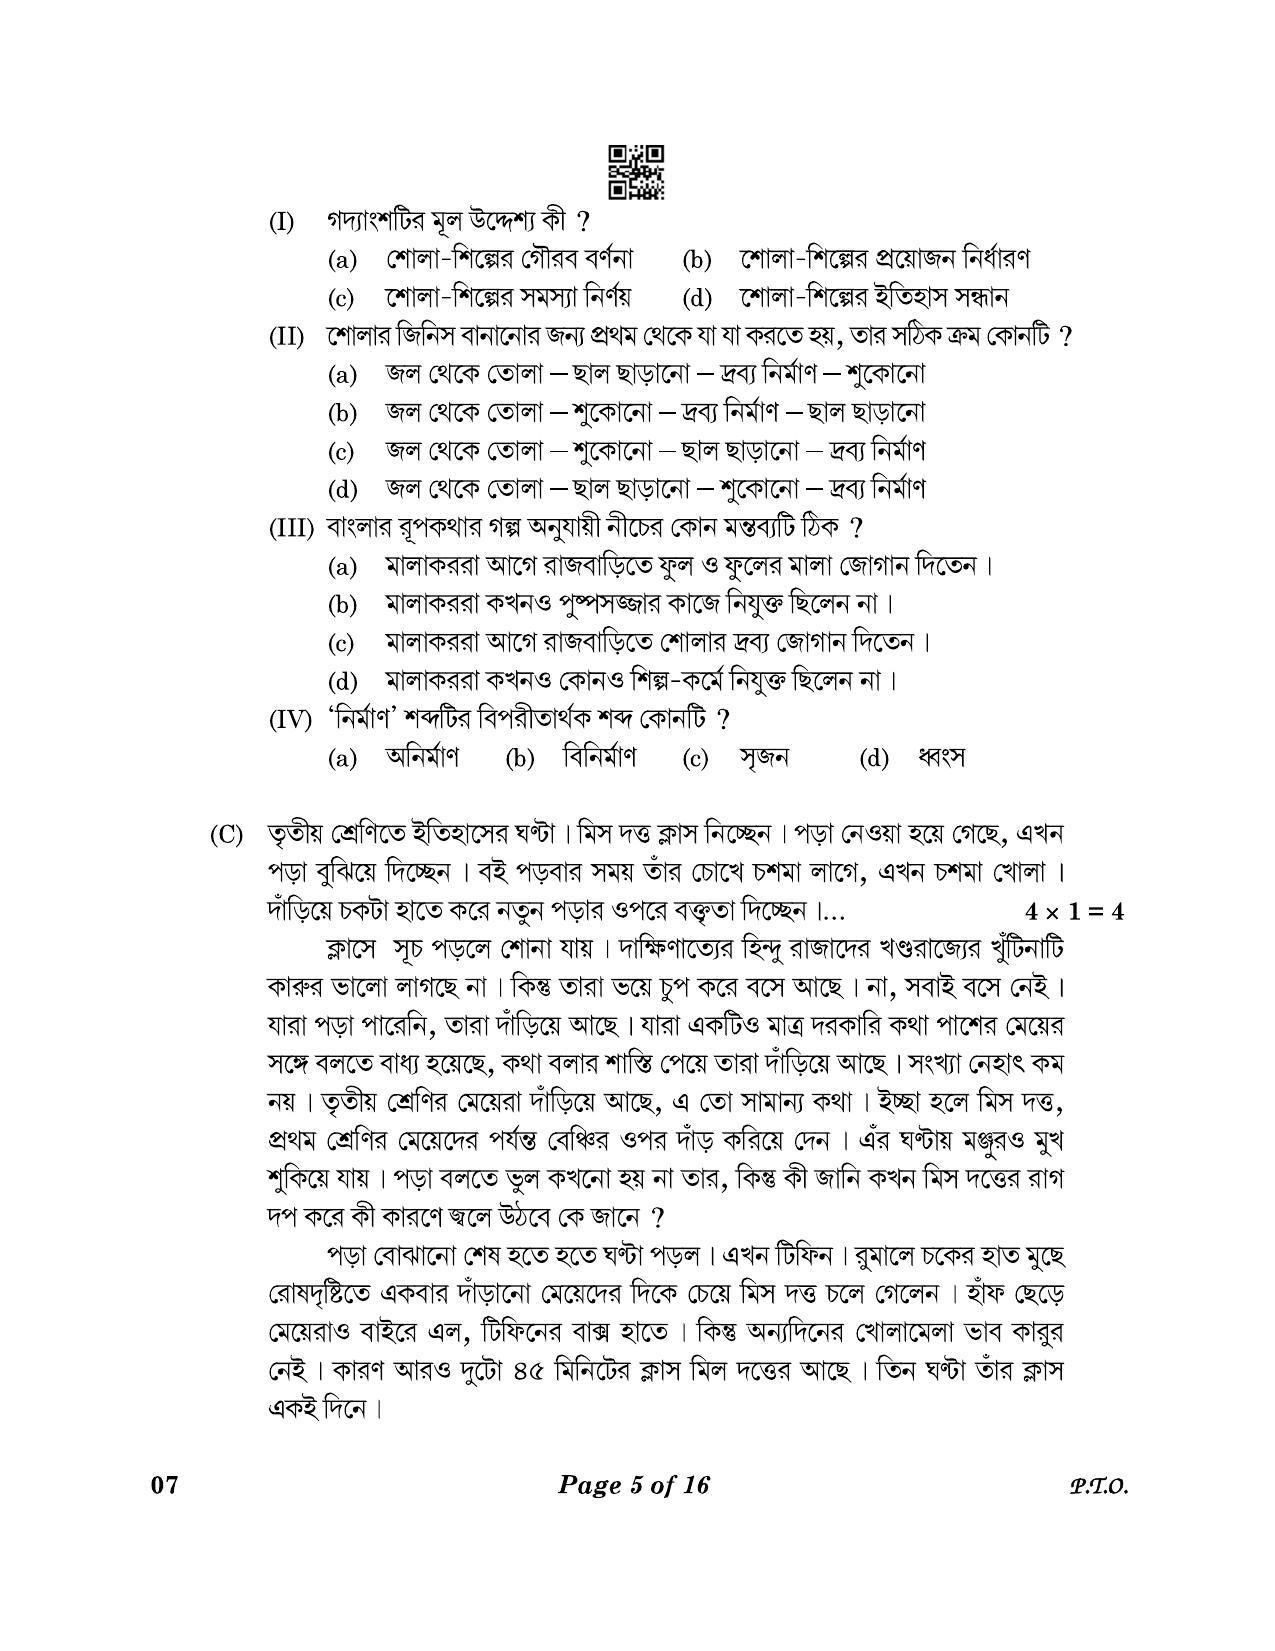 CBSE Class 10 07_Bengali 2023 Question Paper - Page 5